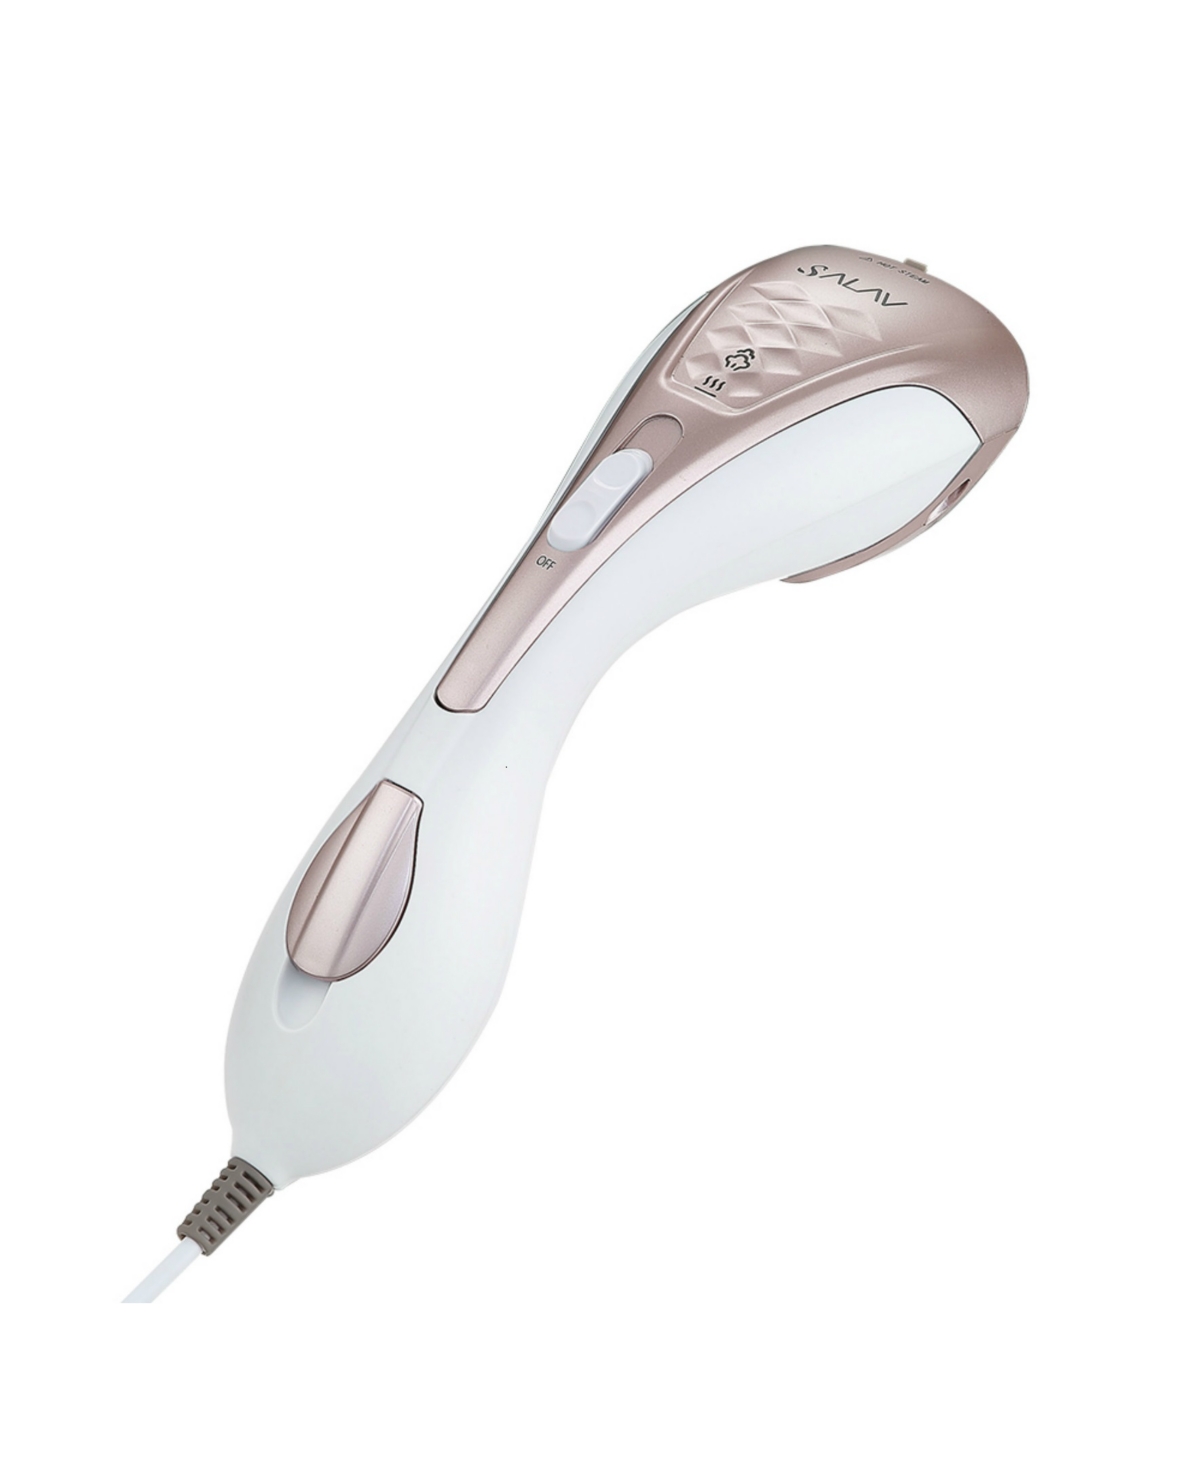 Hs-100 Duo Press Hand Held Iron + Steamer - Rose Gold